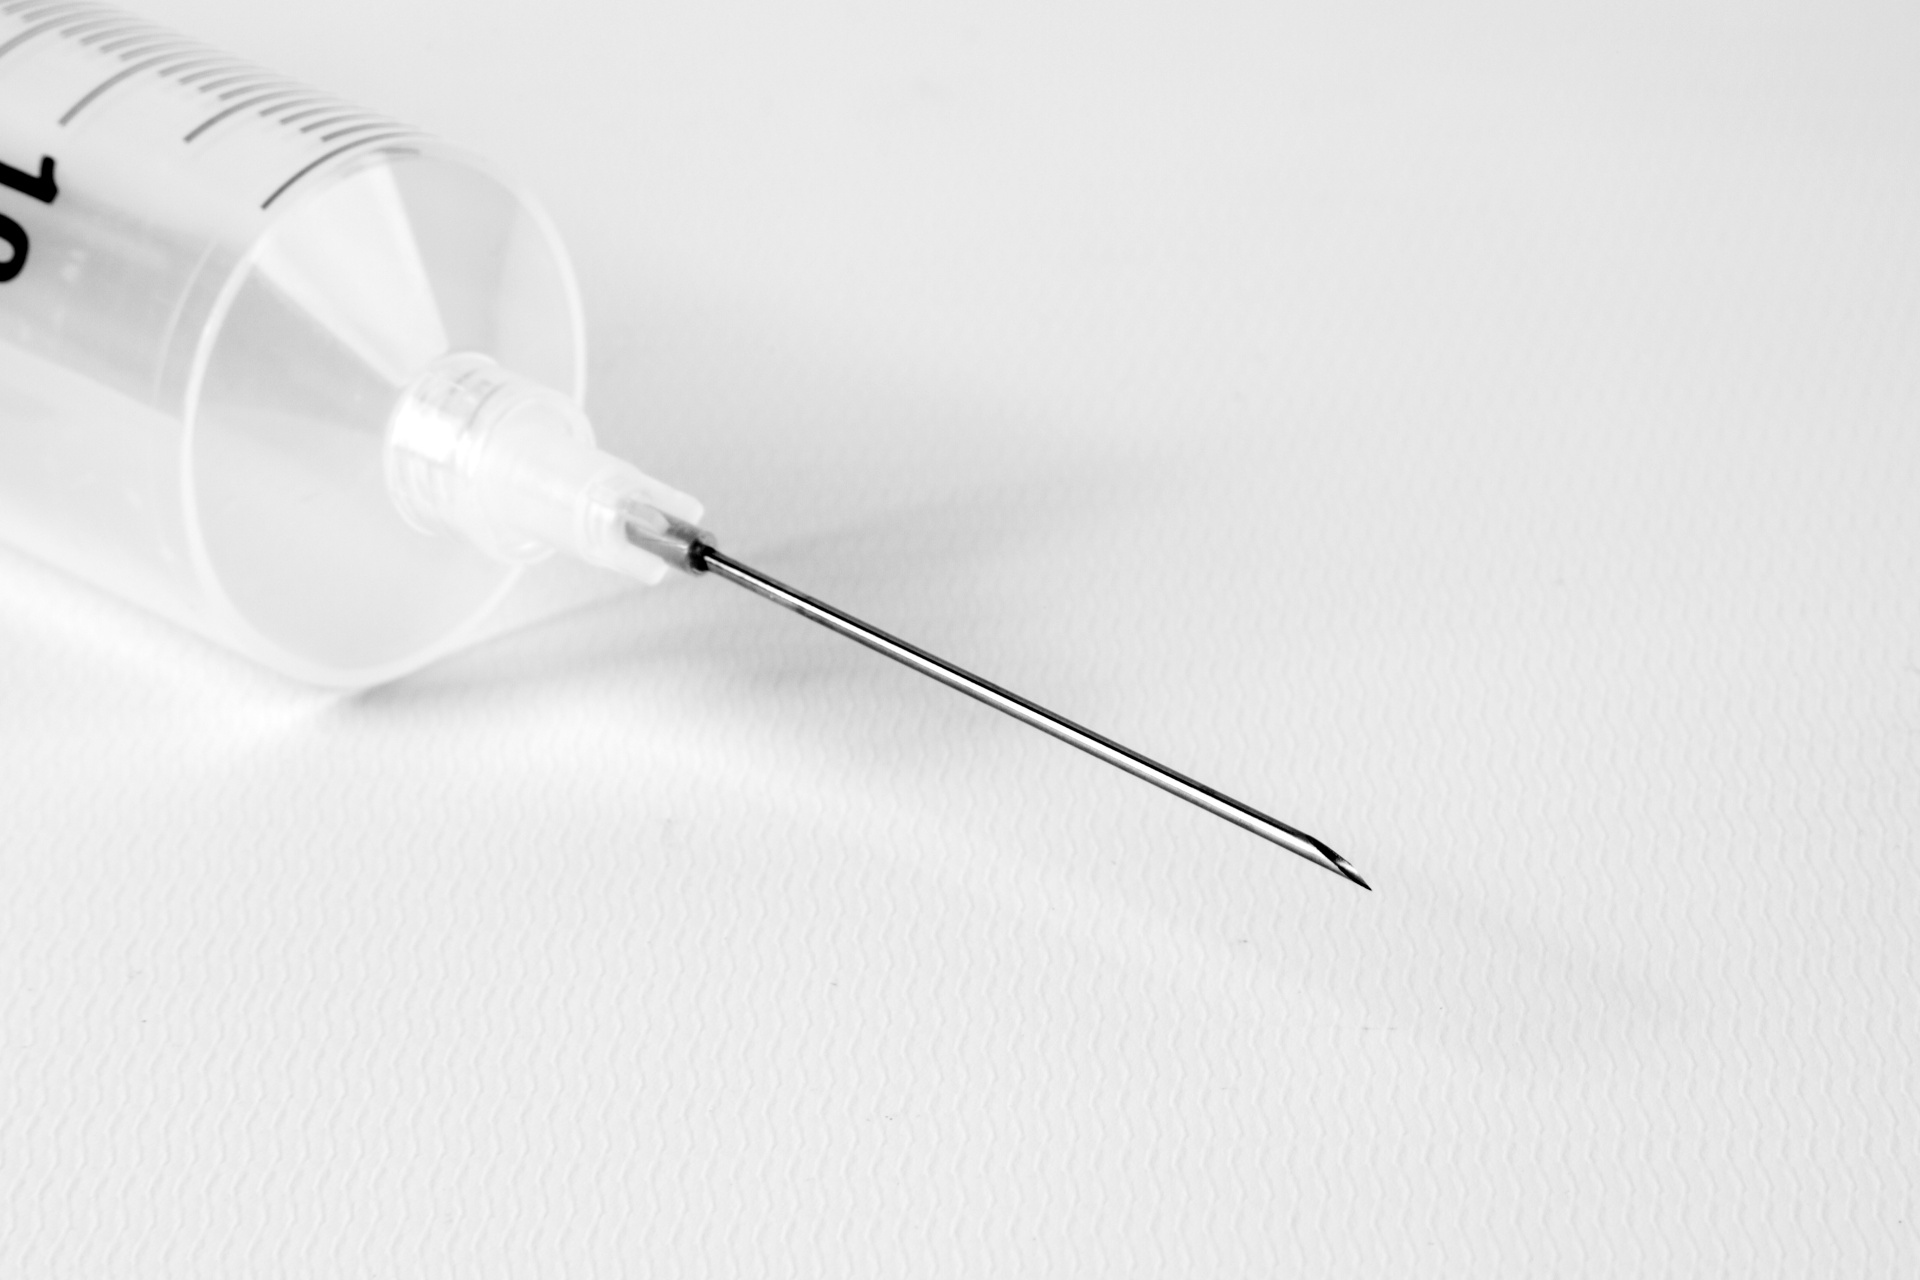 Injectable Drugs Market 2019 Global Leading Players, Industry Updates, Future Growth, Business Prospects, Forthcoming Developments and Future Investments by Forecast to 2023